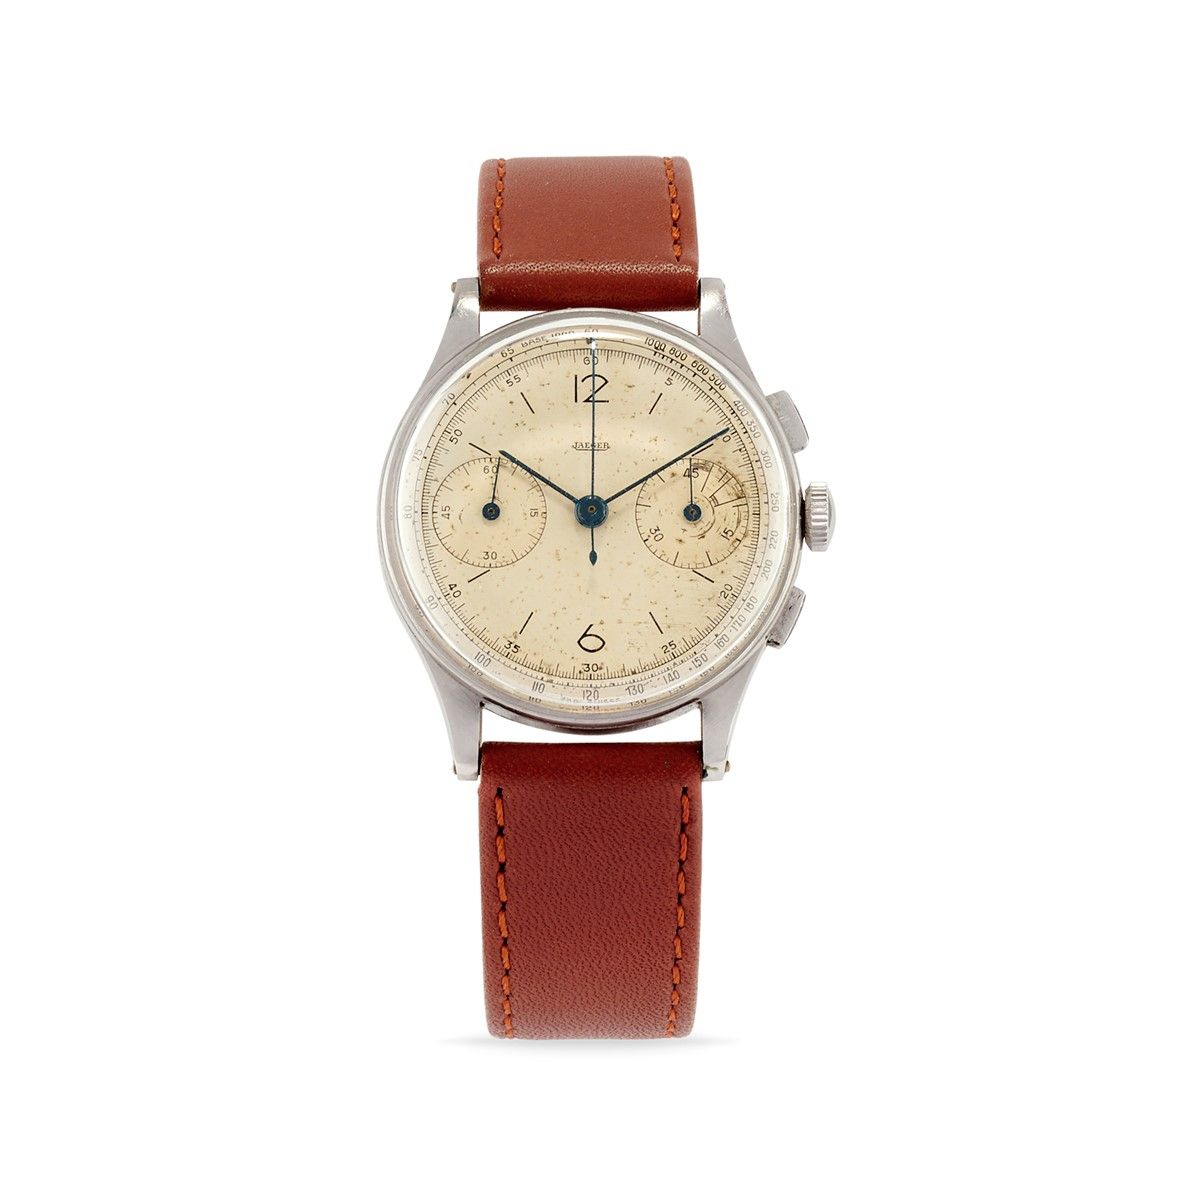 JAEGER-LECOULTRE Jaeger-LeCoultre chronograph, ‘40s


Stainless steel round case&hellip;